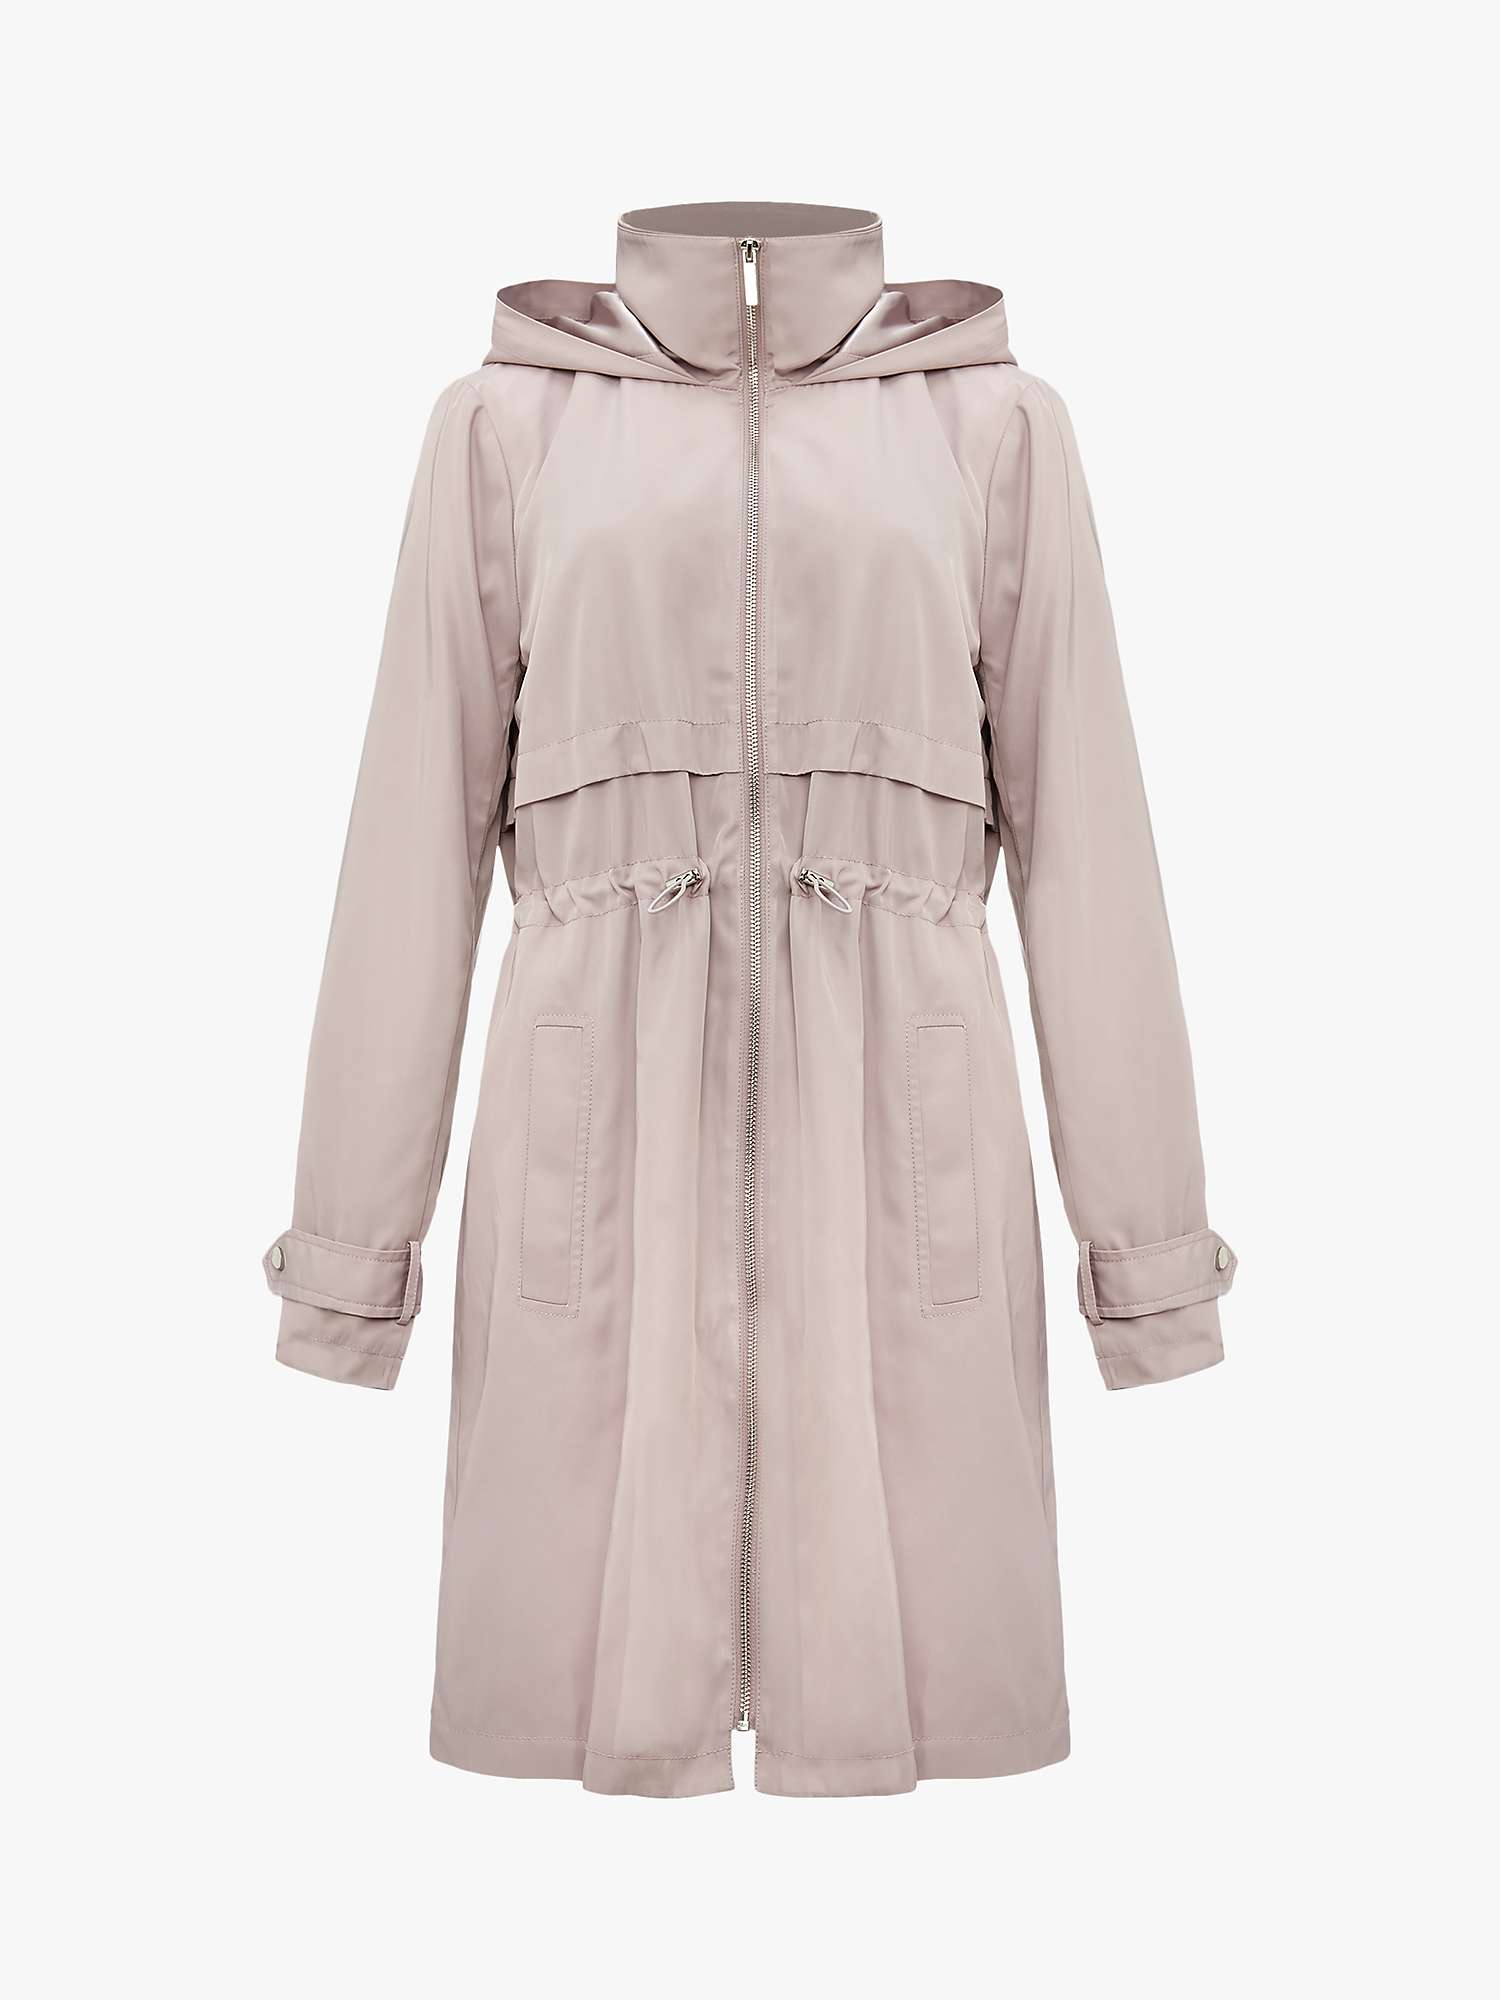 Phase Eight Sindy Soft Parka Coat, Pale Pink at John Lewis & Partners